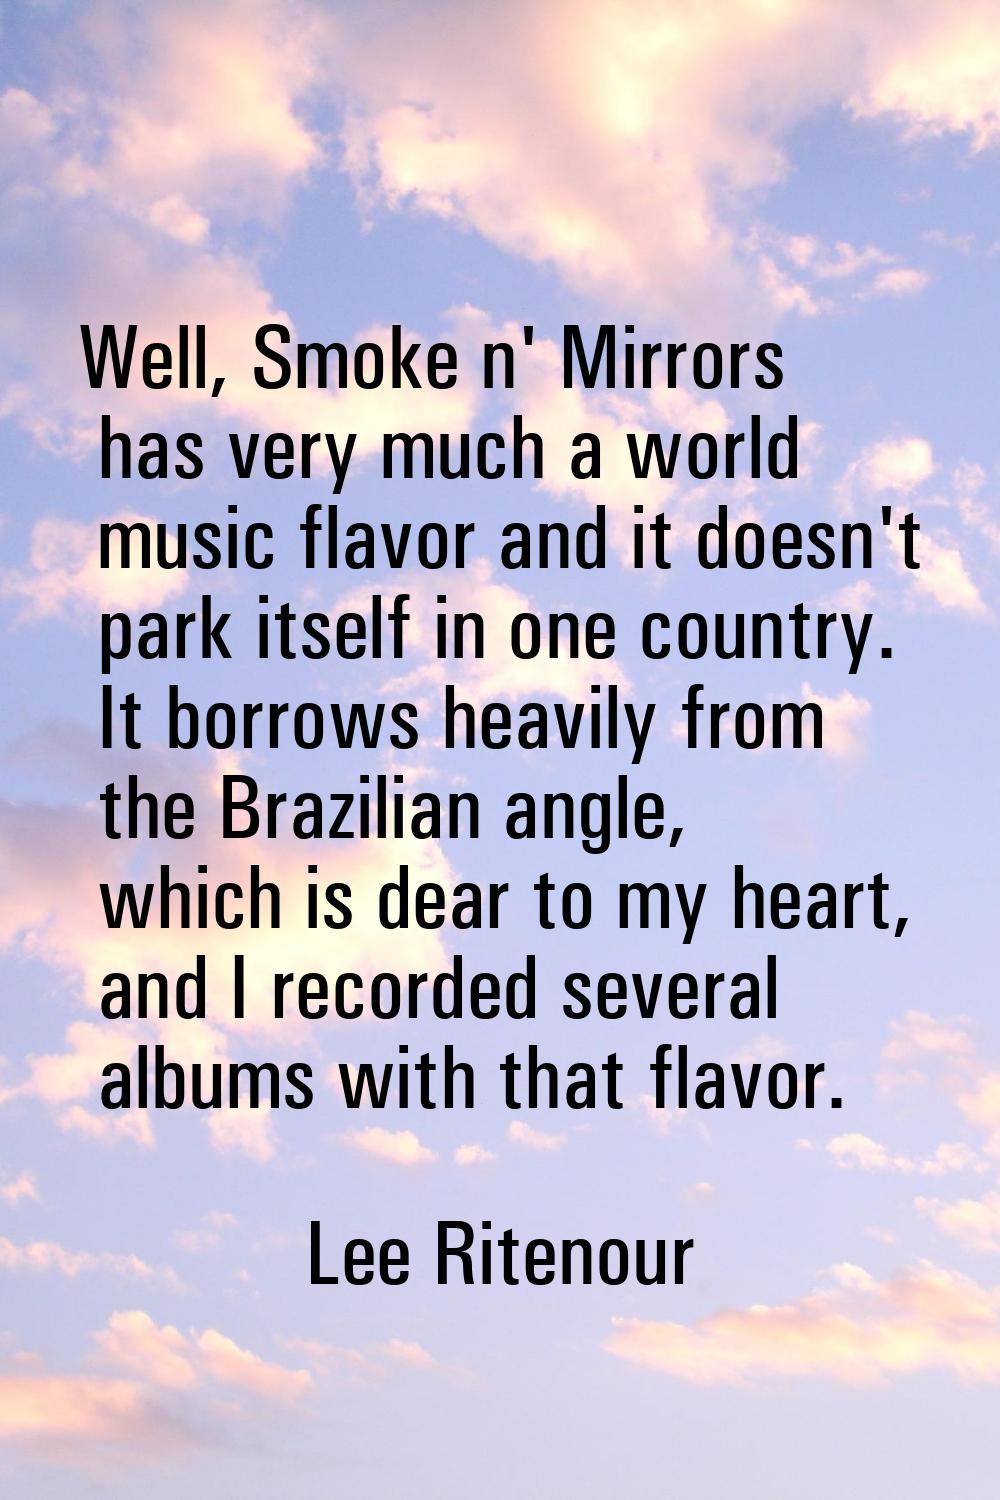 Well, Smoke n' Mirrors has very much a world music flavor and it doesn't park itself in one country